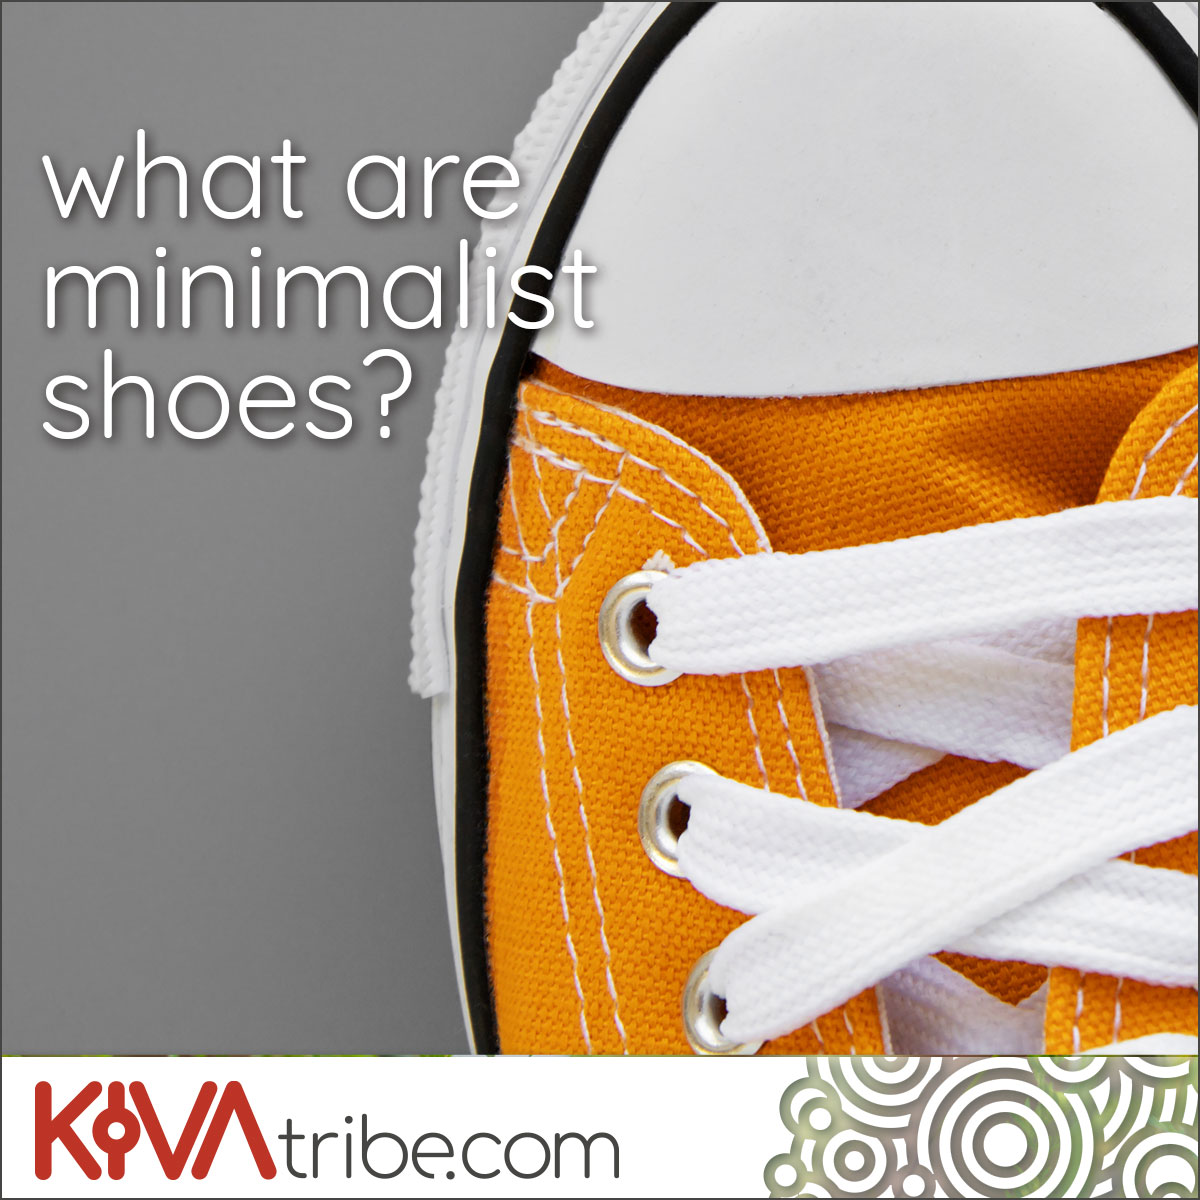 Image showing a pair of yellow shoes which some might describe as minimalist with the words "what are minimalist shoes?"